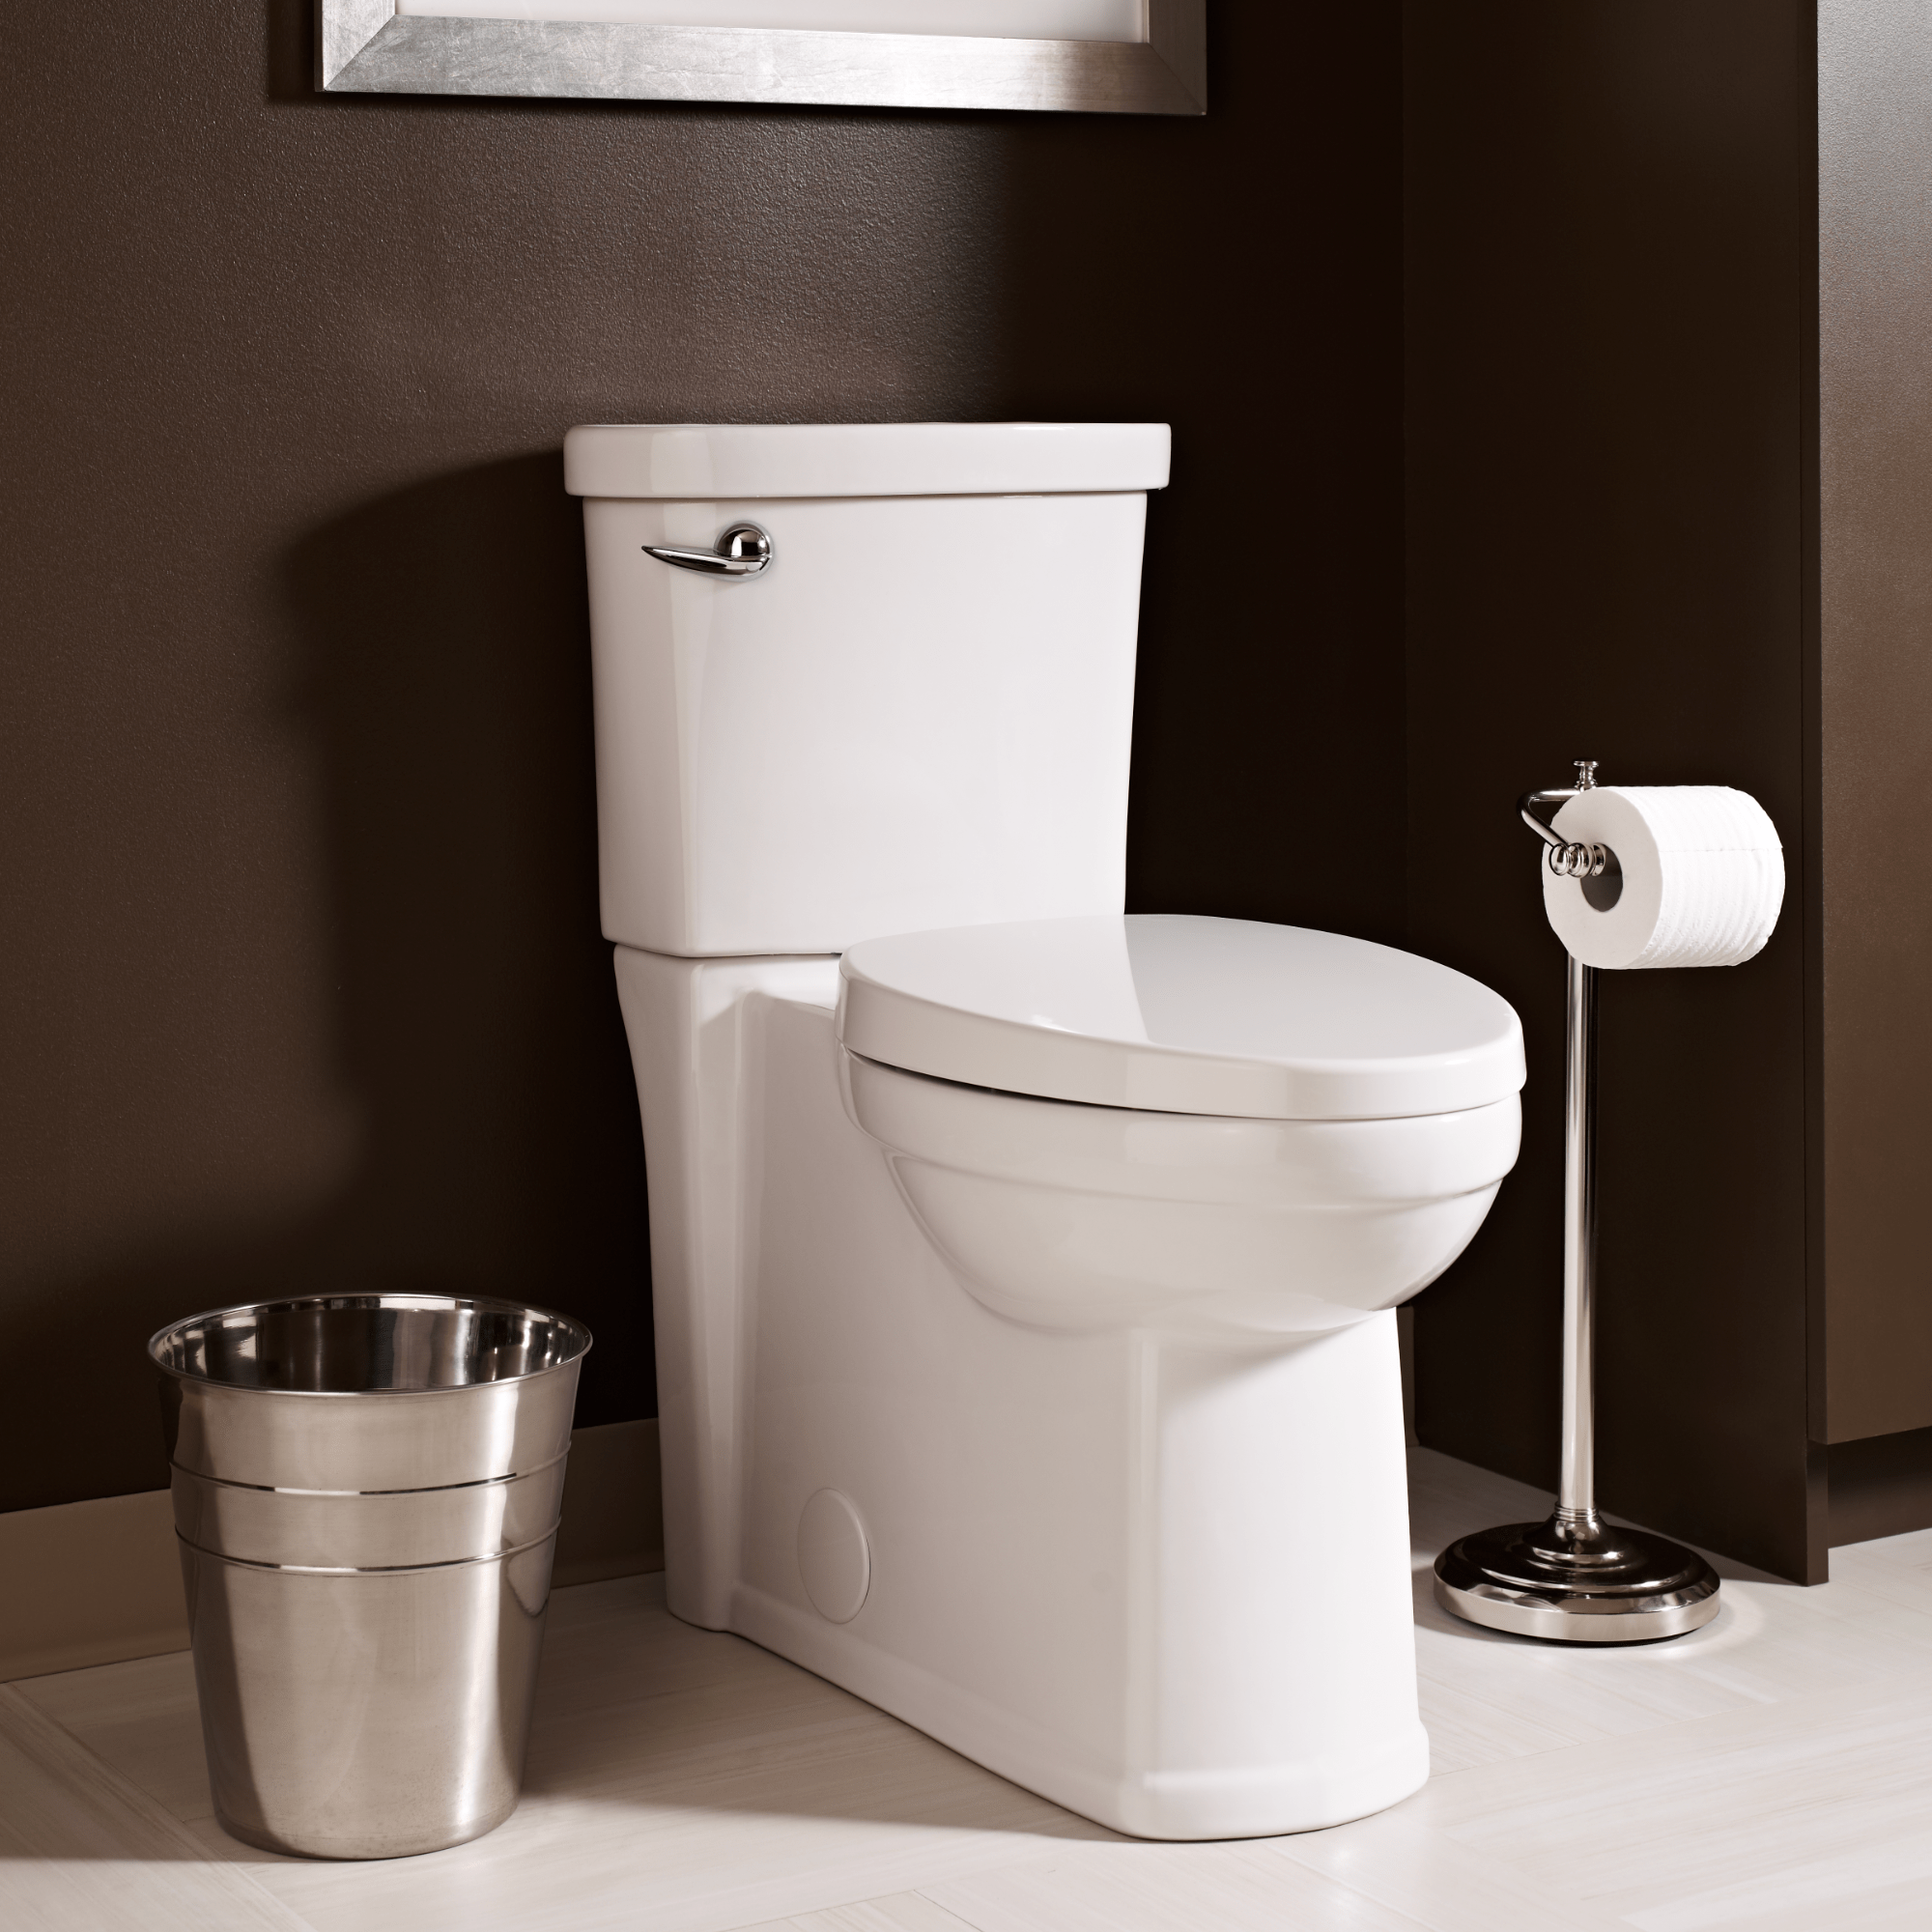 Benefits of a Toilet with Concealed Flush Tank